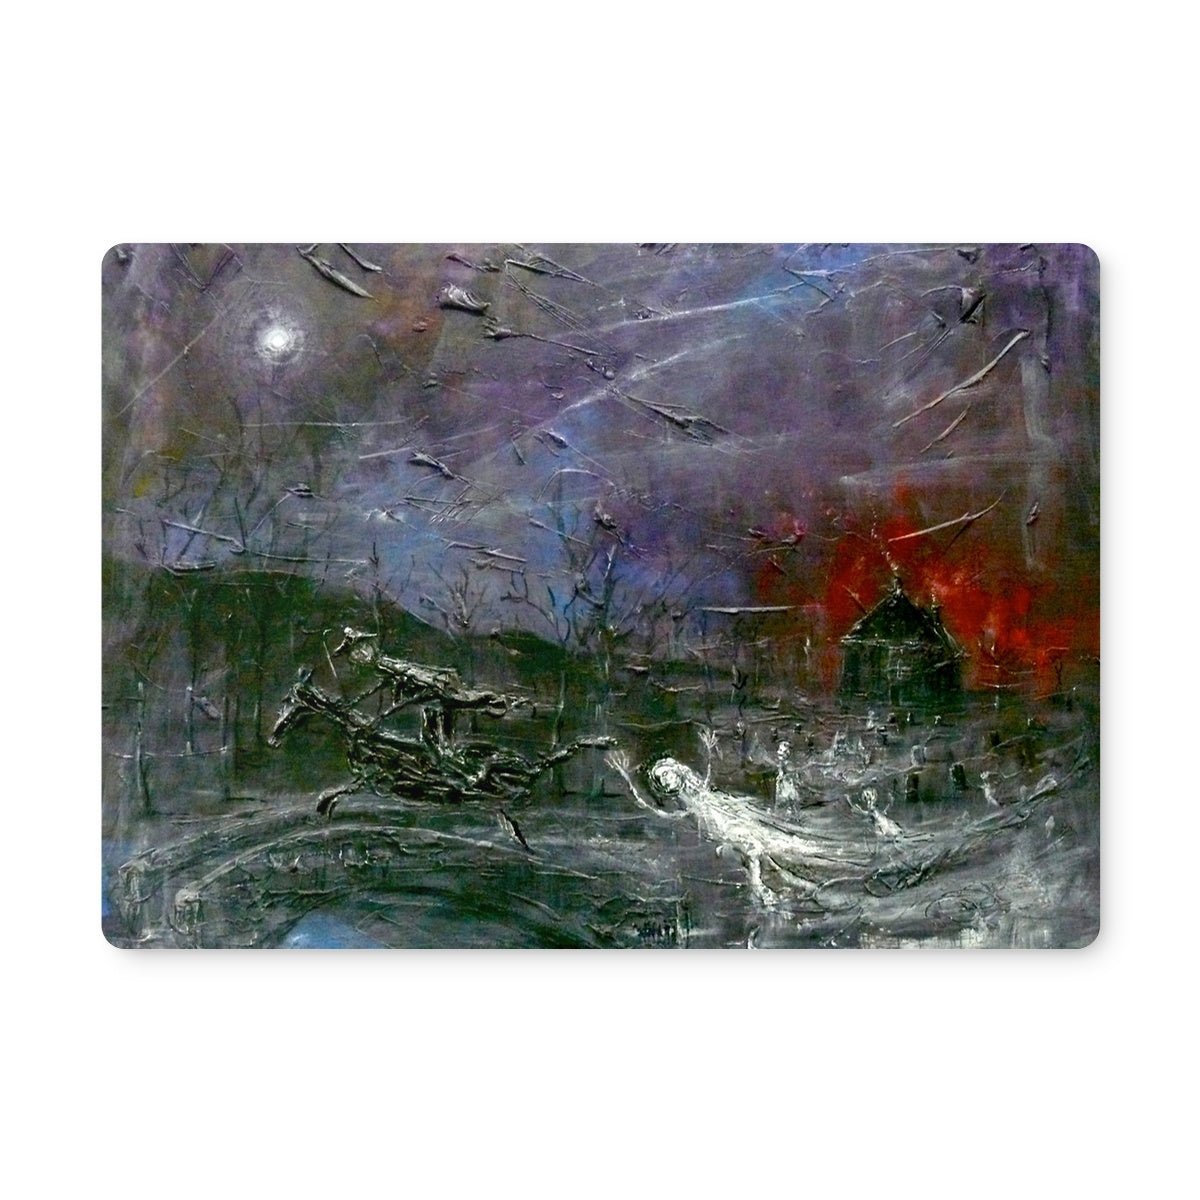 Tam O Shanter Art Gifts Placemat-Placemats-Abstract & Impressionistic Art Gallery-6 Placemats-Paintings, Prints, Homeware, Art Gifts From Scotland By Scottish Artist Kevin Hunter